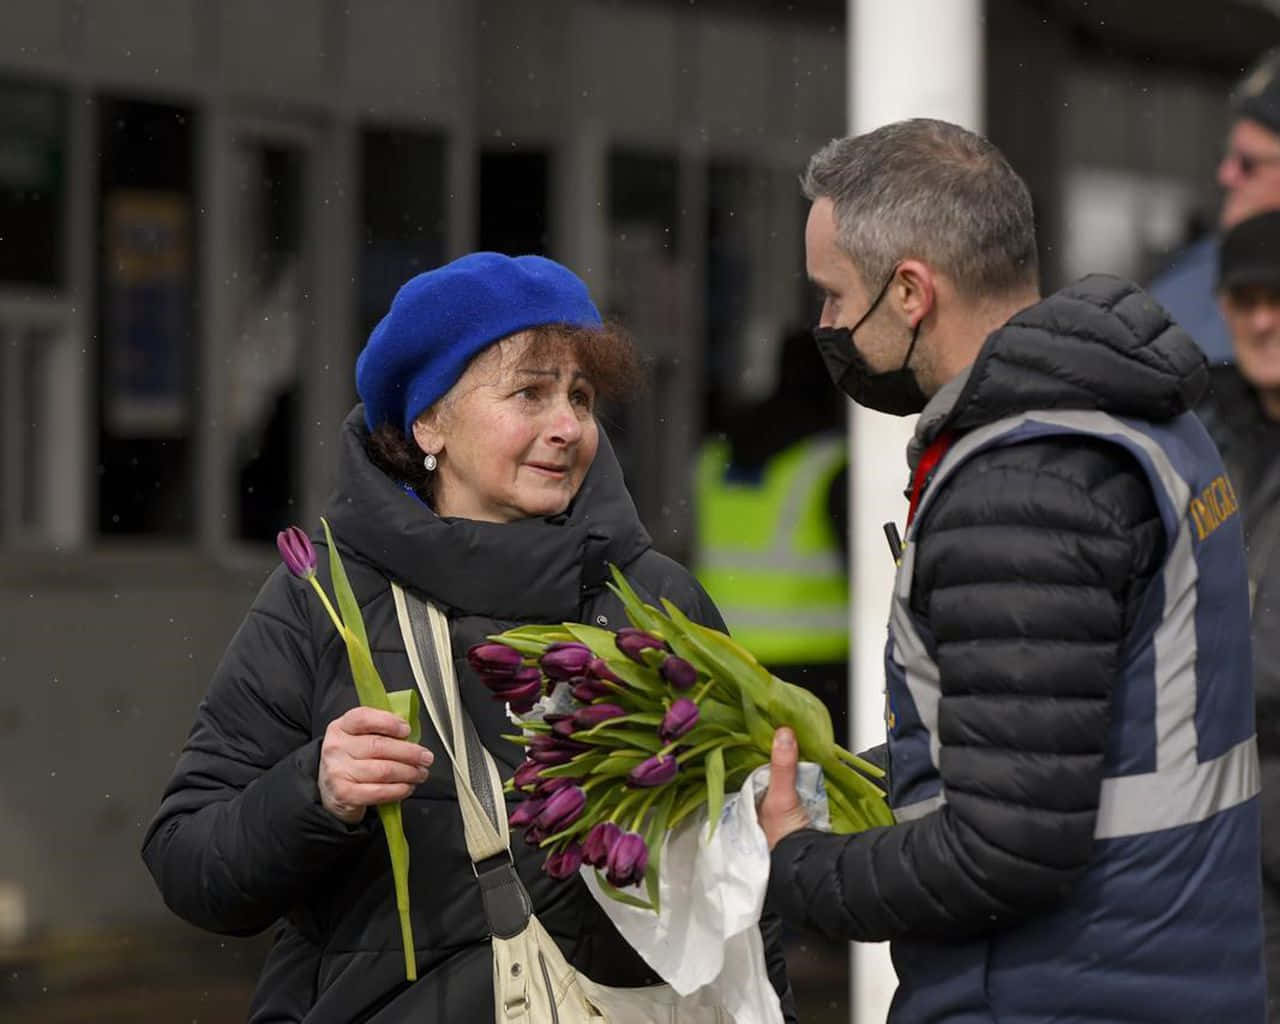 A Man And Woman Are Holding Flowers